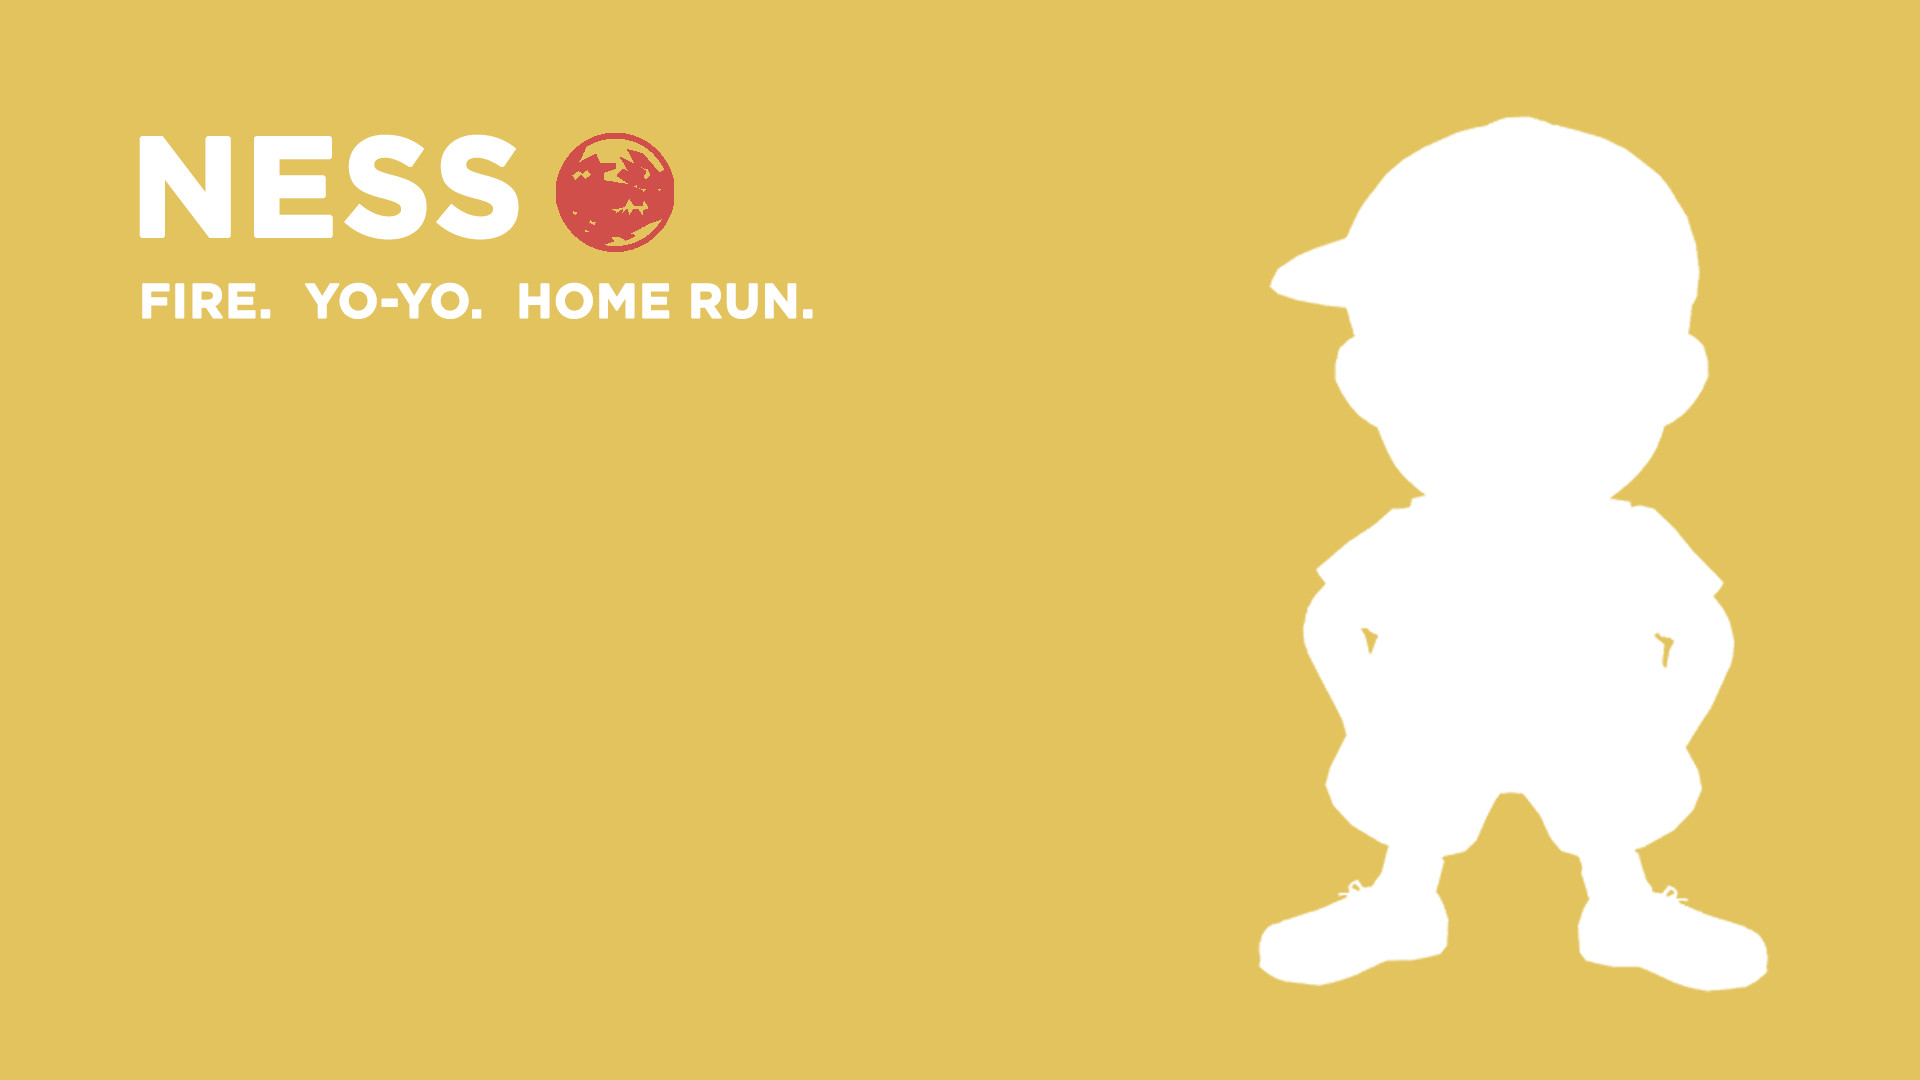 1920x1080 Ness Wallpaper by ItsNyteShadows Ness Wallpaper by ItsNyteShadows